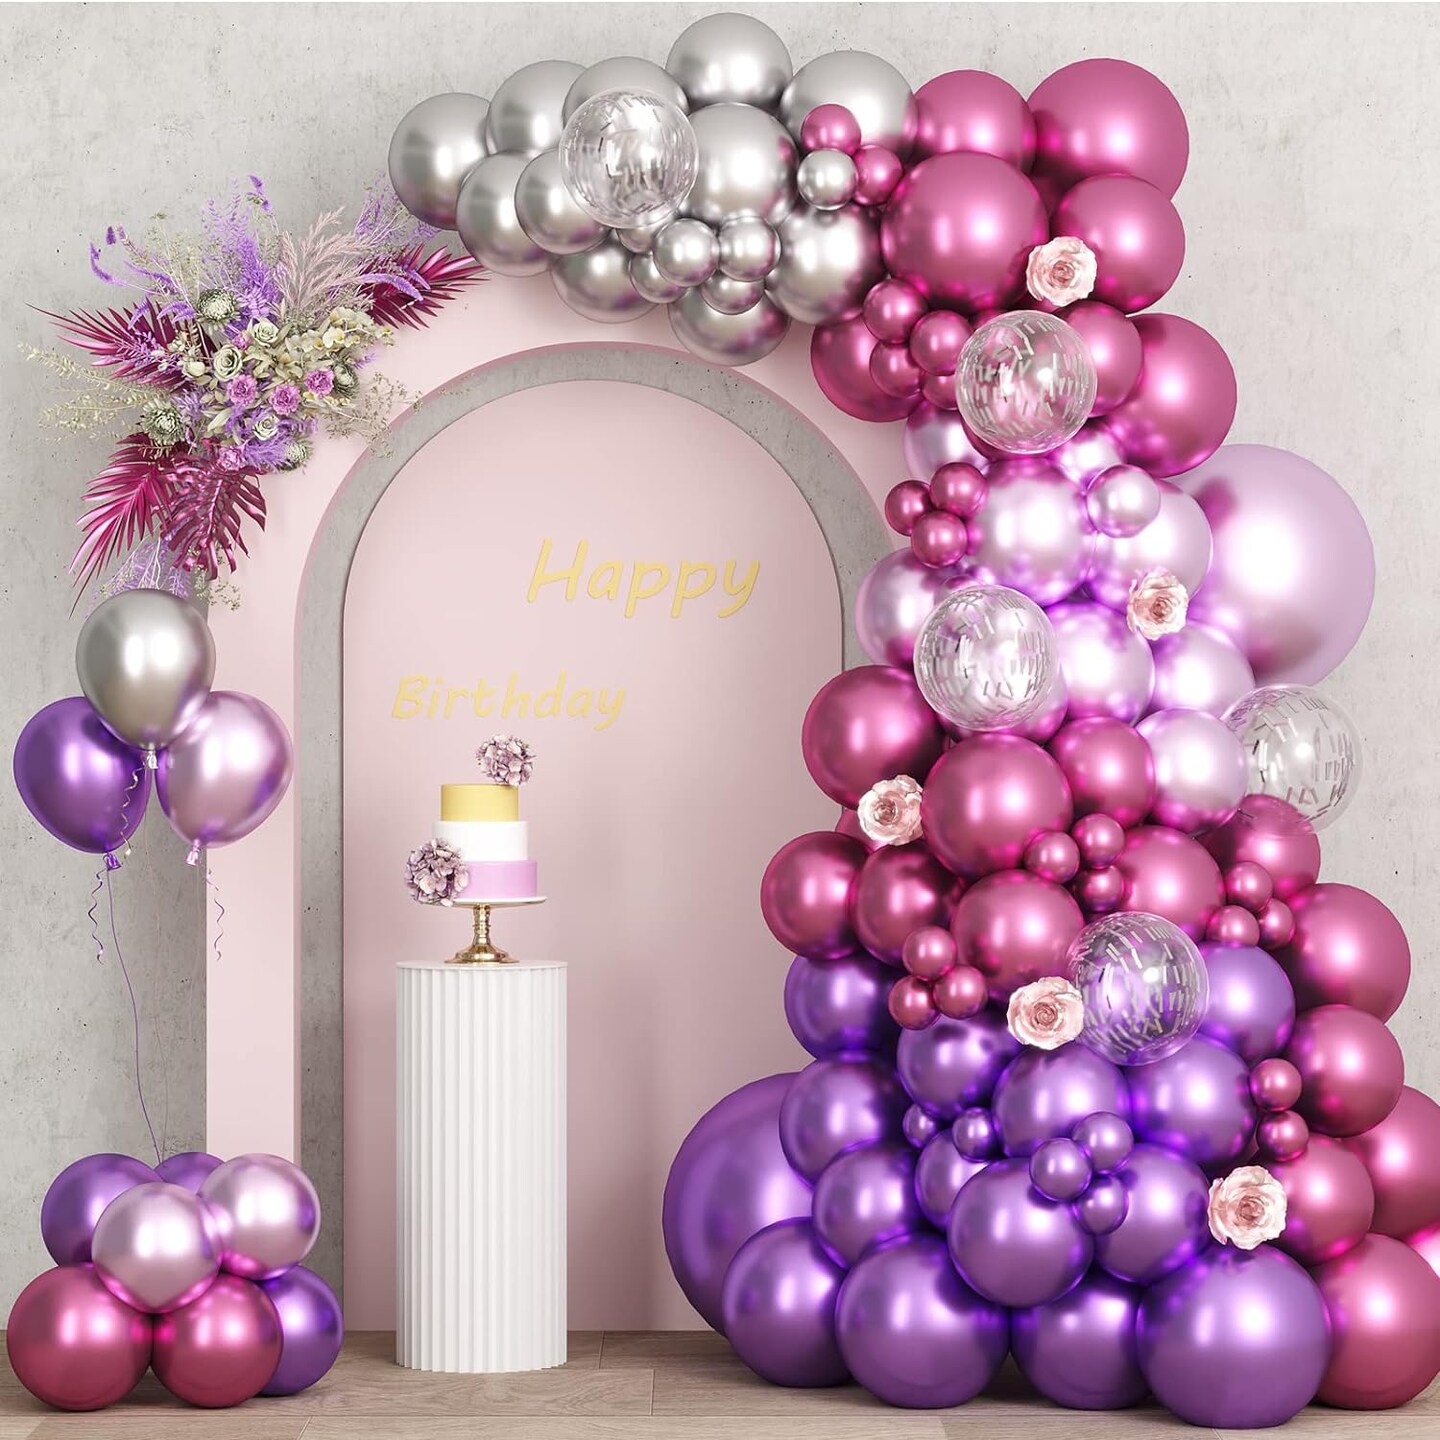 87pcs Metallic Pink Purple Balloon Garland Arch Kit, 18 12 10 5 Inch Pink Purple Red Silver Confetti Latex Party Balloons for Birthday Graduation Baby Shower Decoration